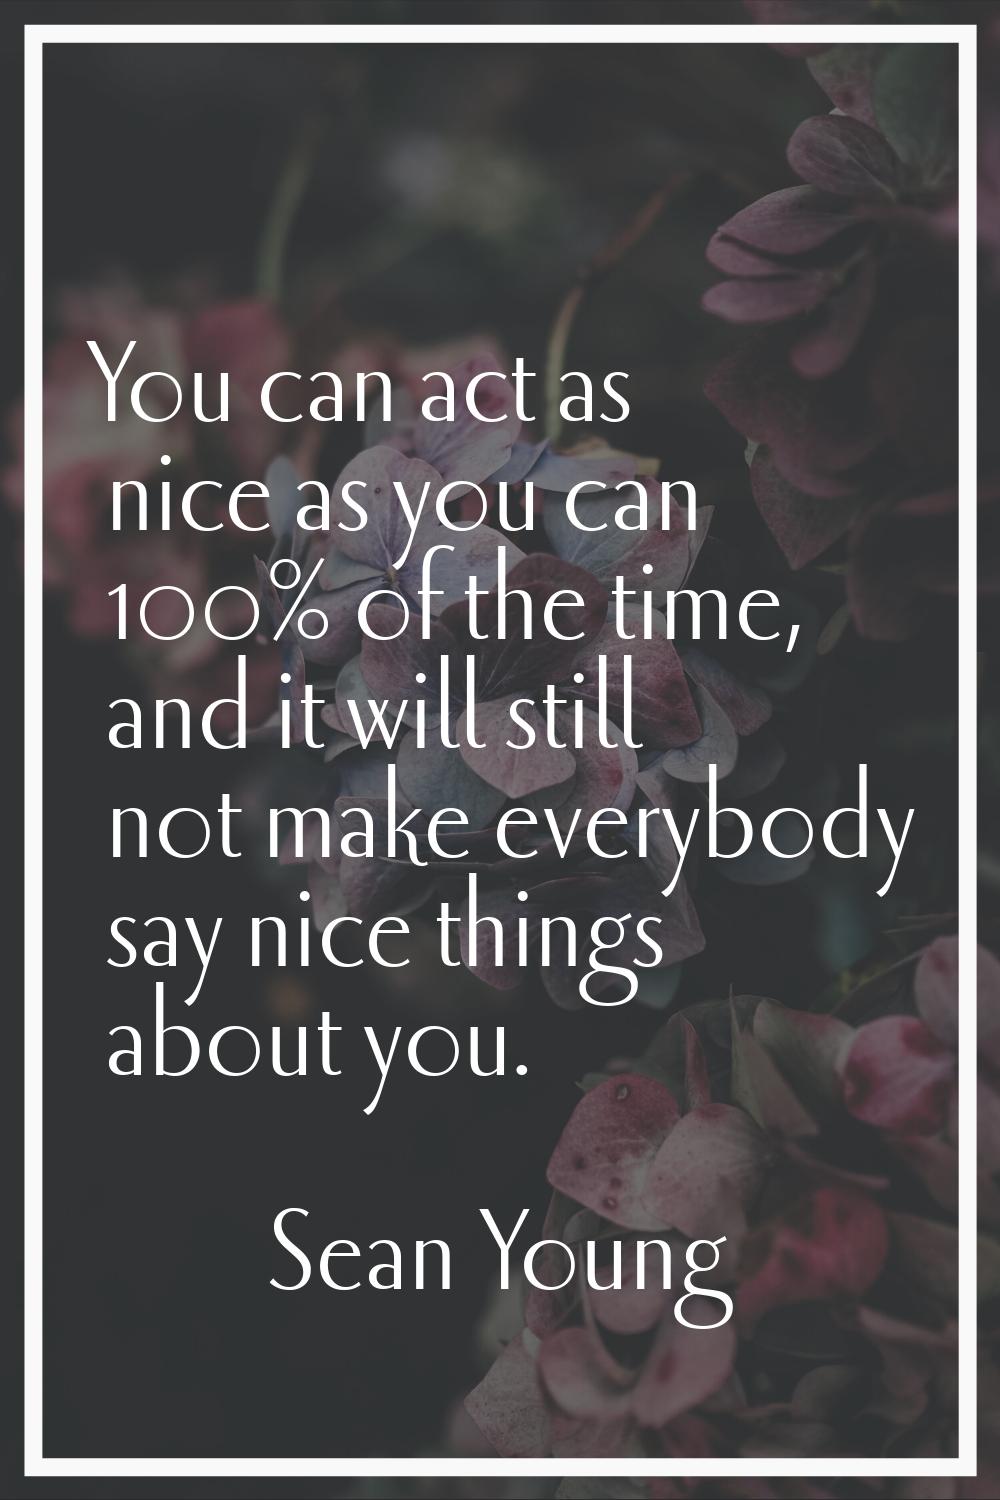 You can act as nice as you can 100% of the time, and it will still not make everybody say nice thin